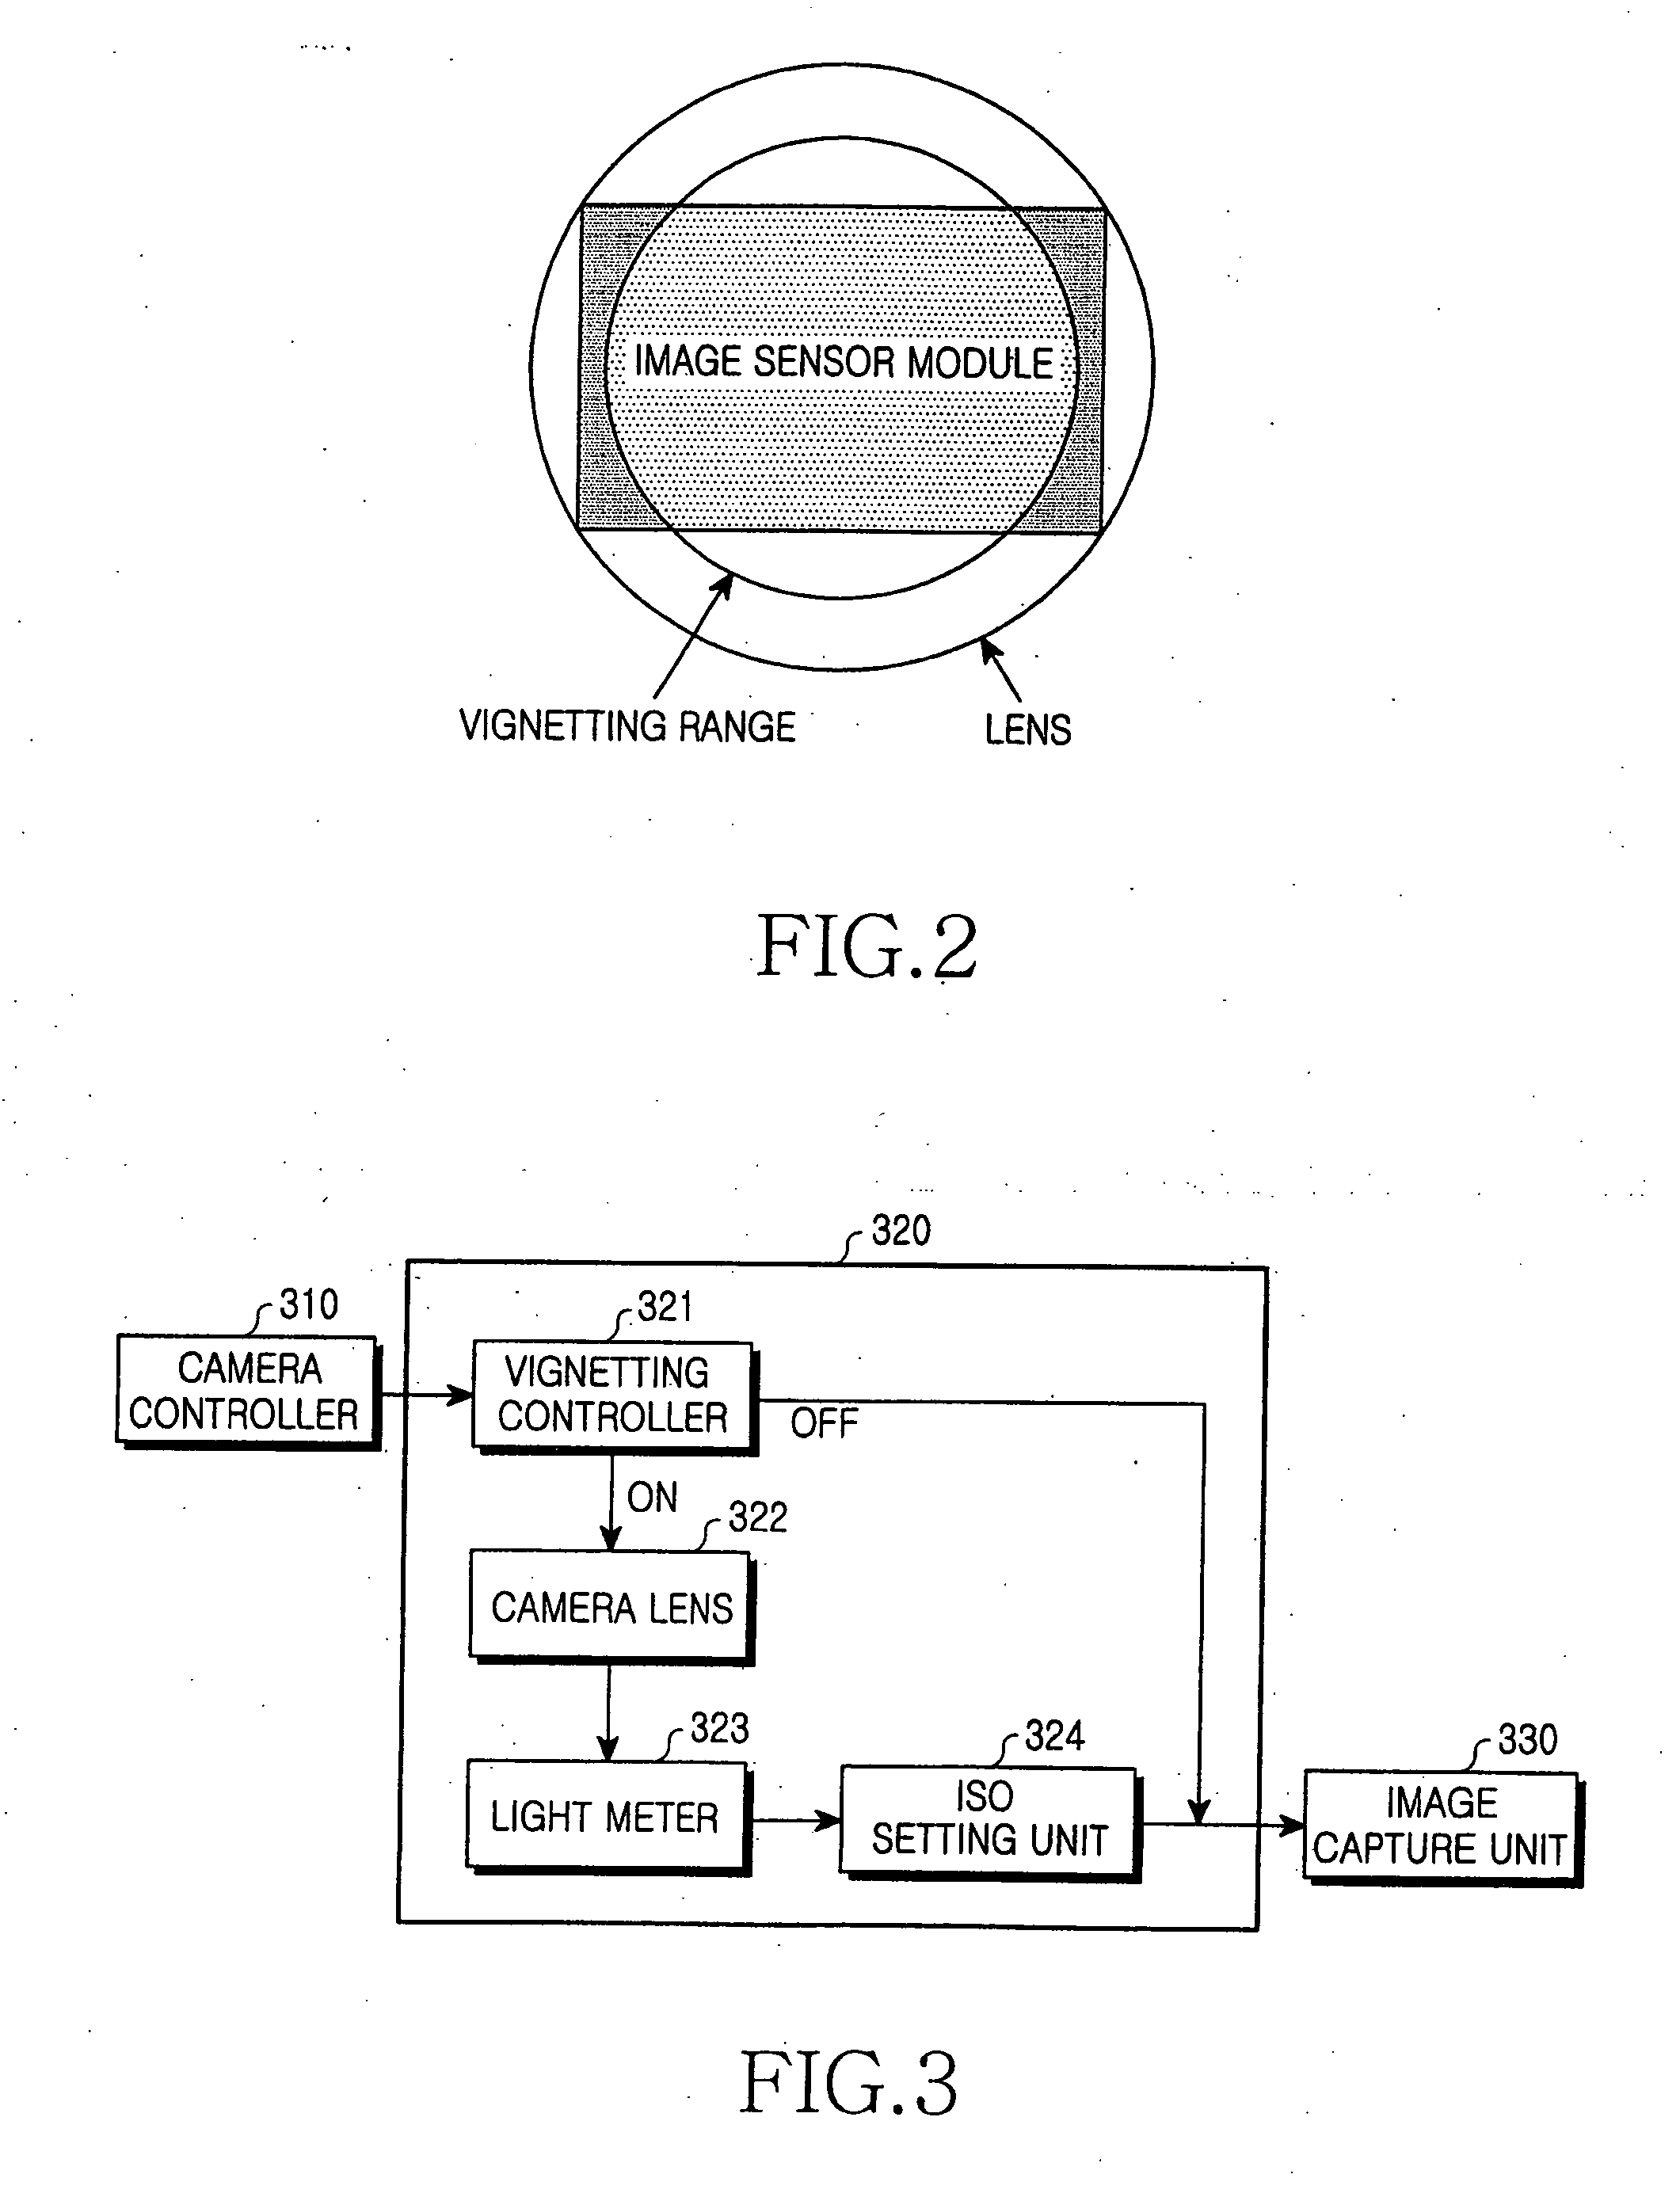 Apparatus and method for excluding vignetting in a digital camera